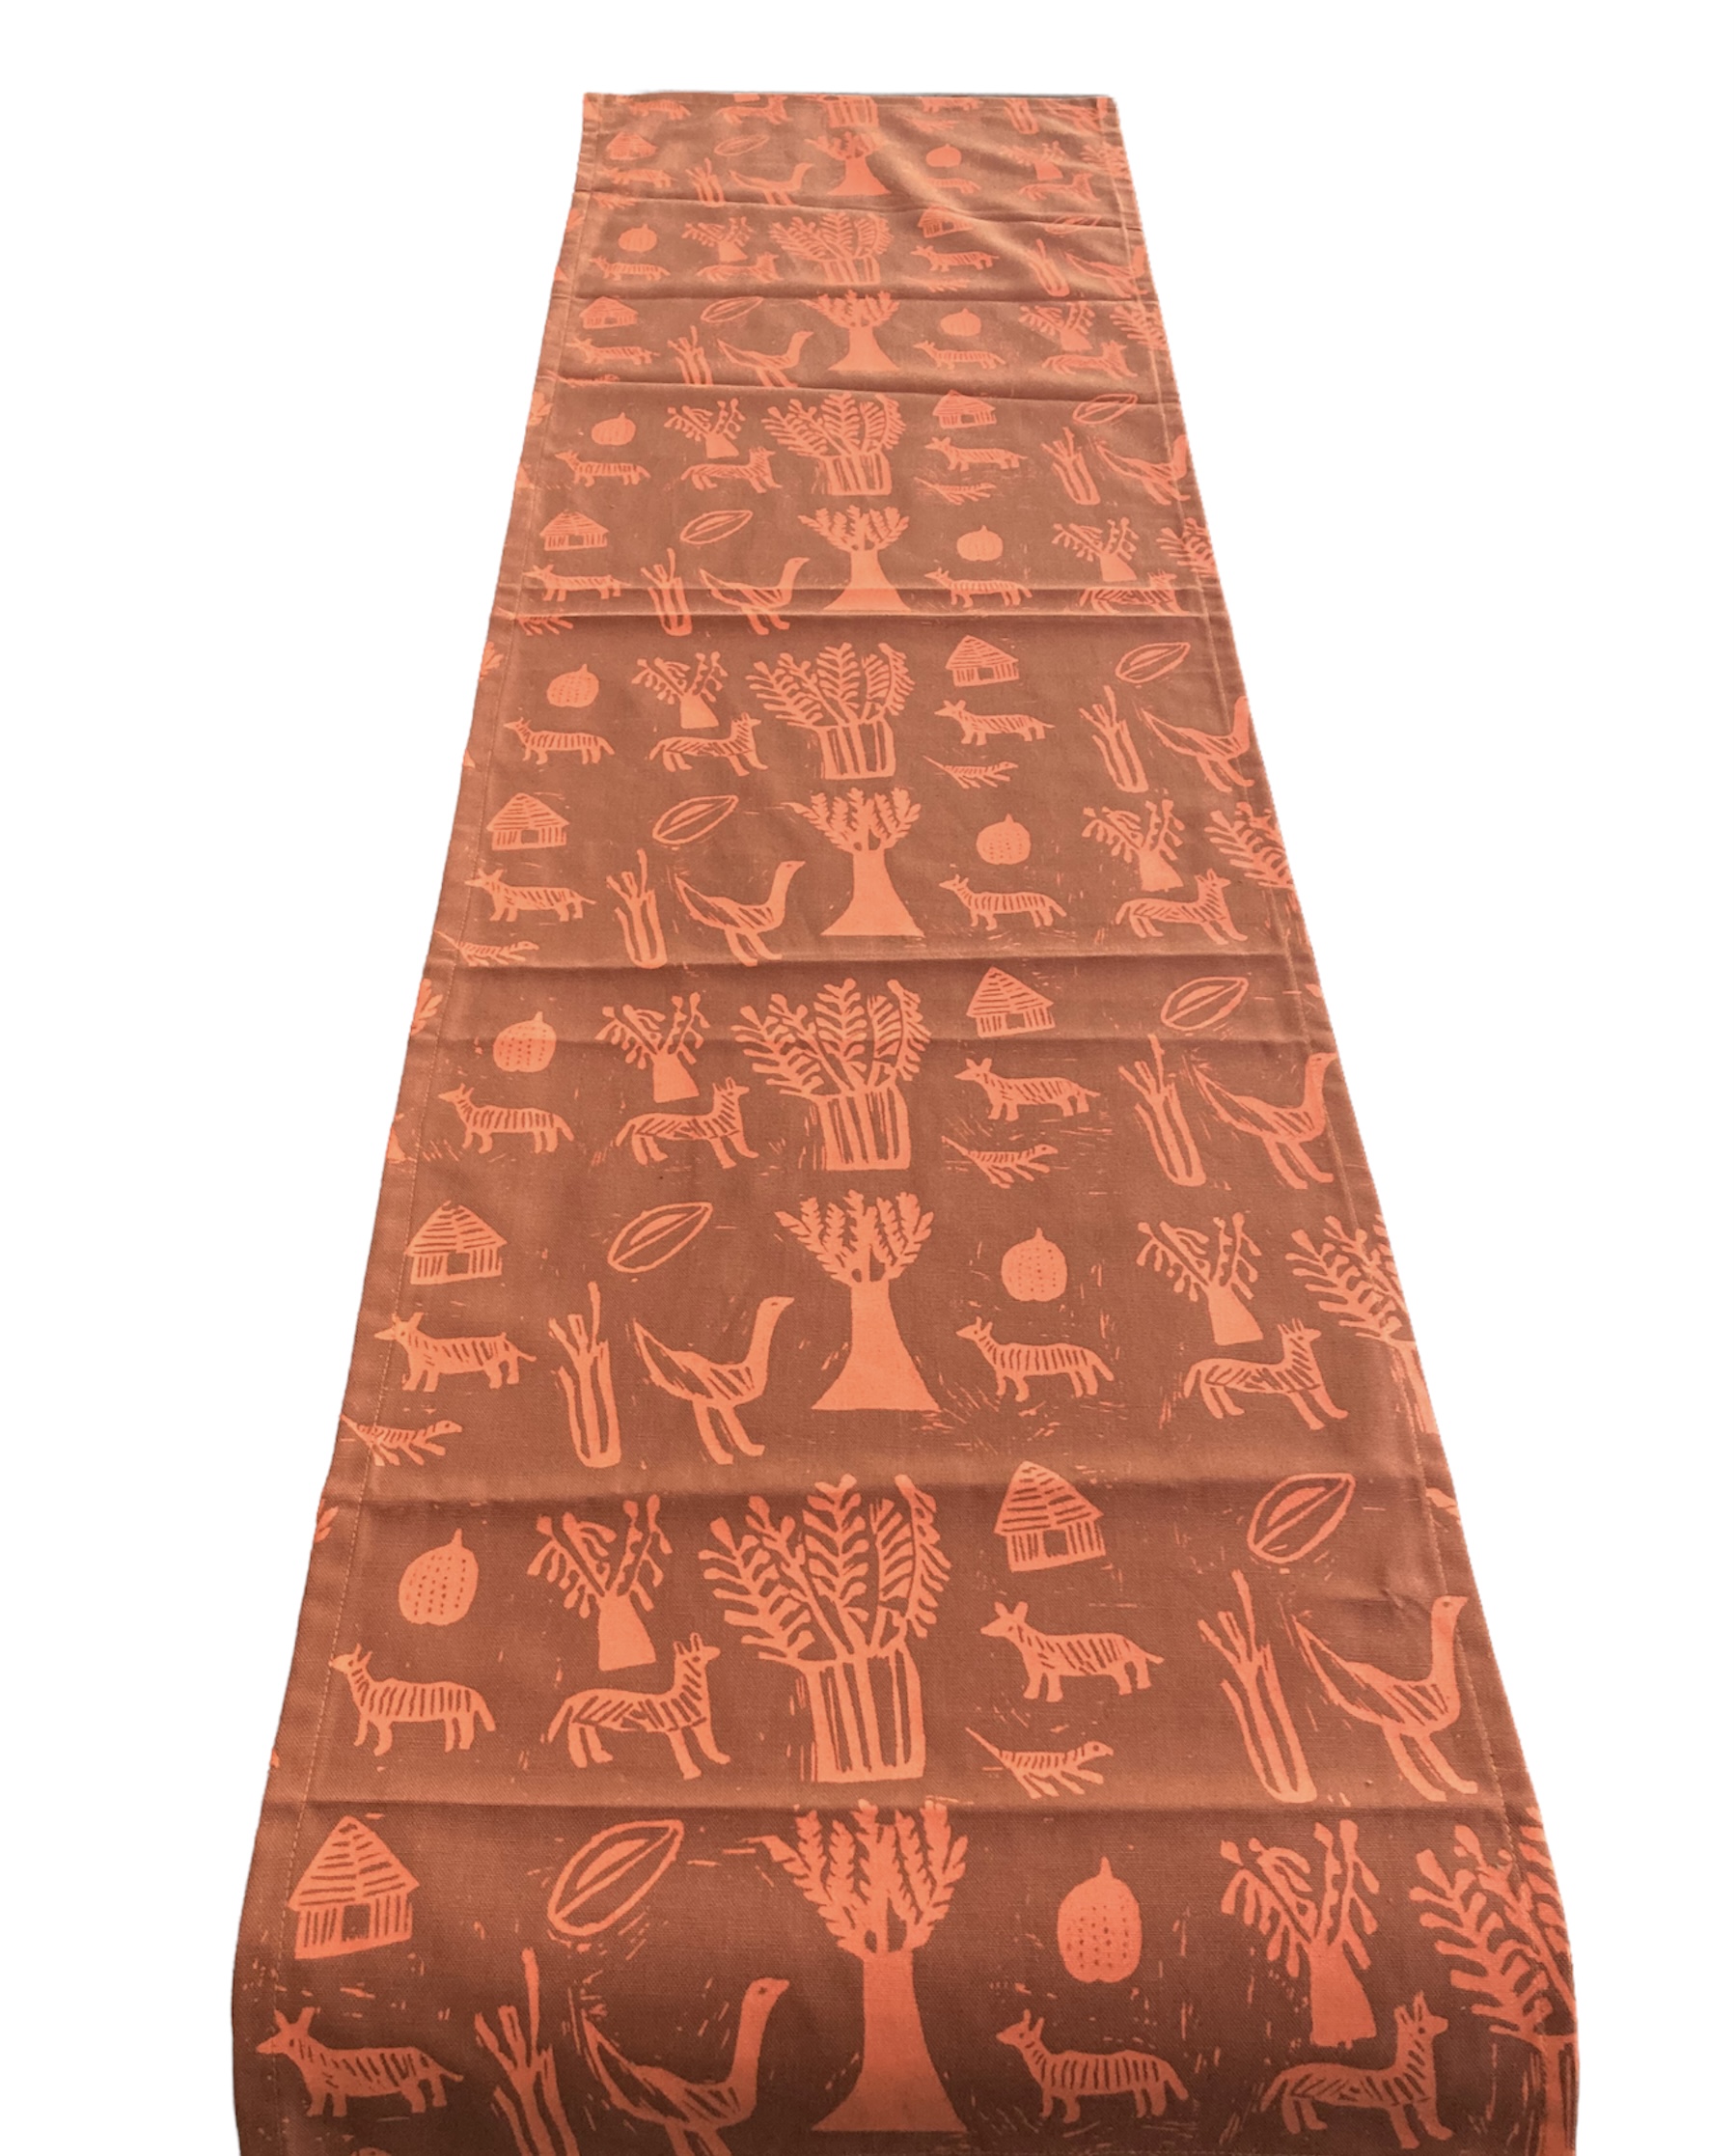 100% cotton Table Runner 96\" x 16\" from Namibia - Design 02l